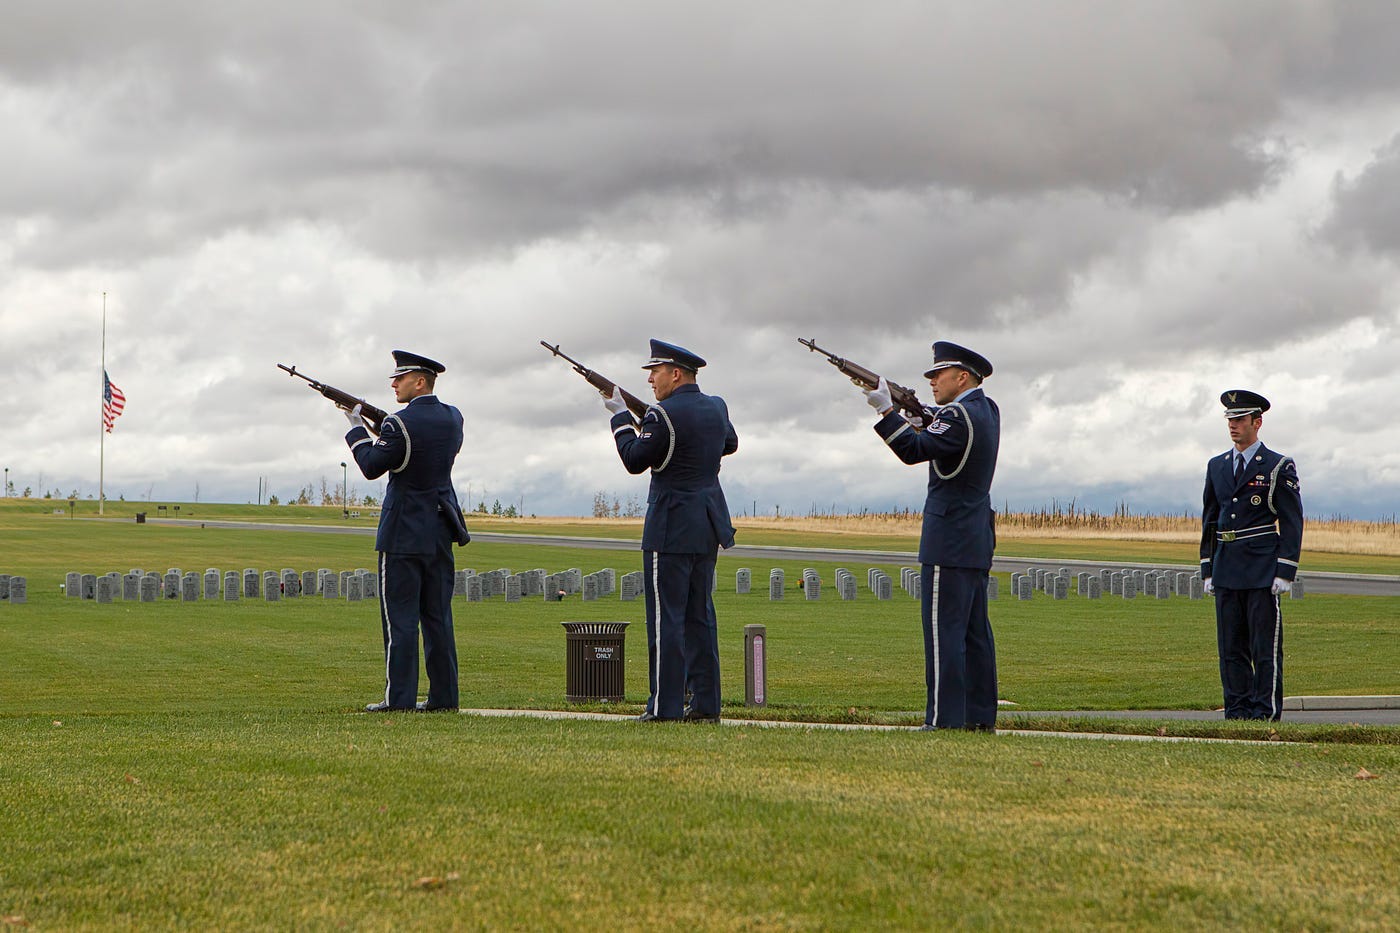 A military three-rifle salute for a funeral with the American flag on a hill in the background at half mast